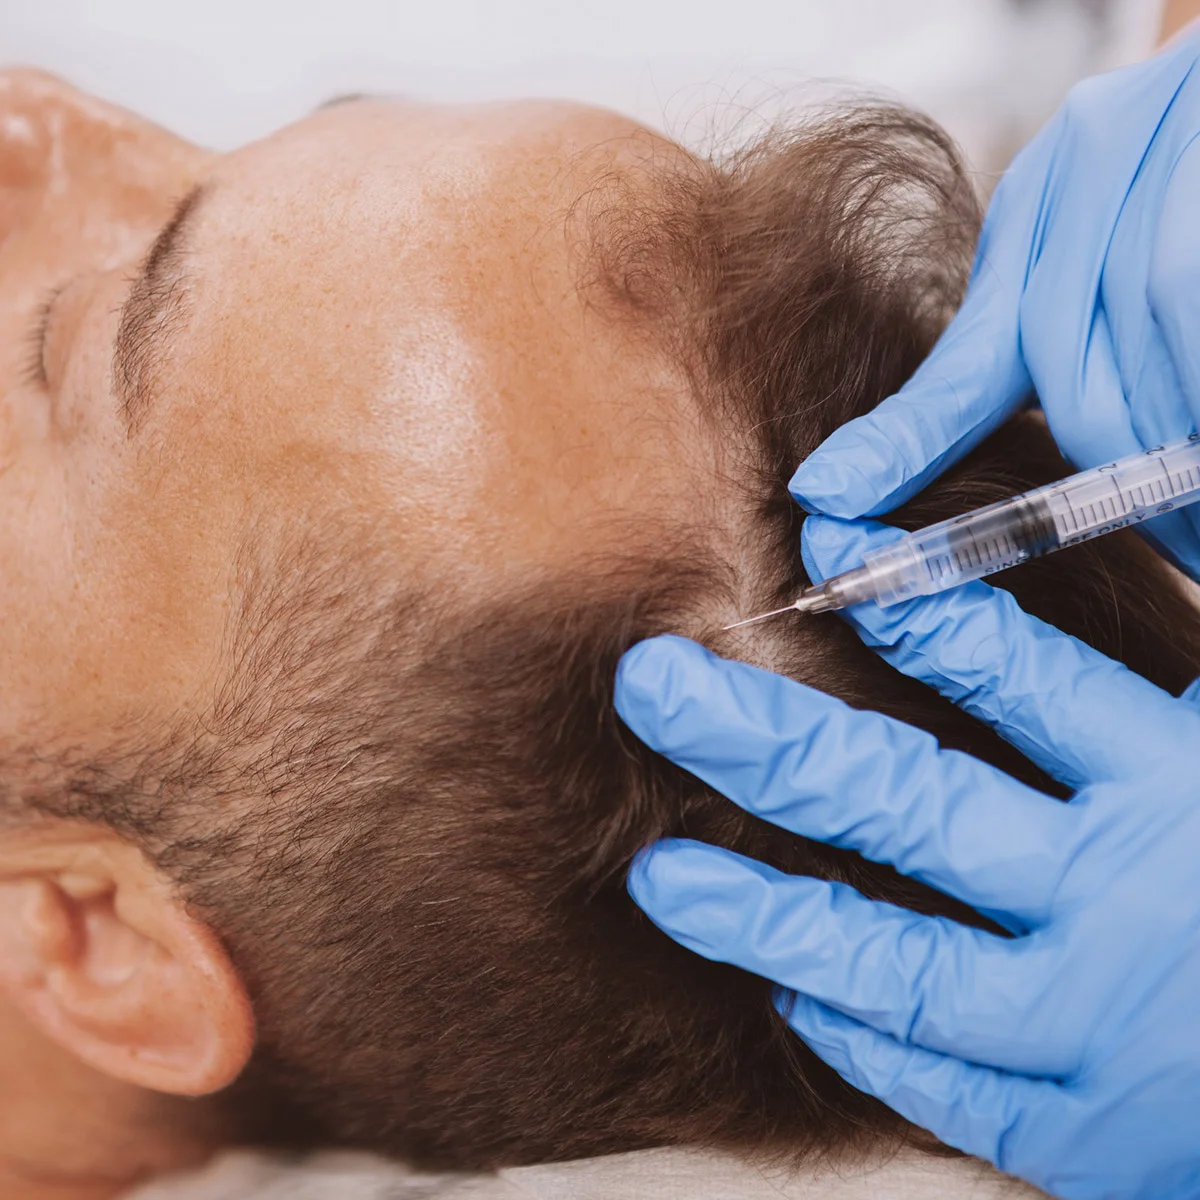 Middle-aged man getting PRP Injections in his scalp